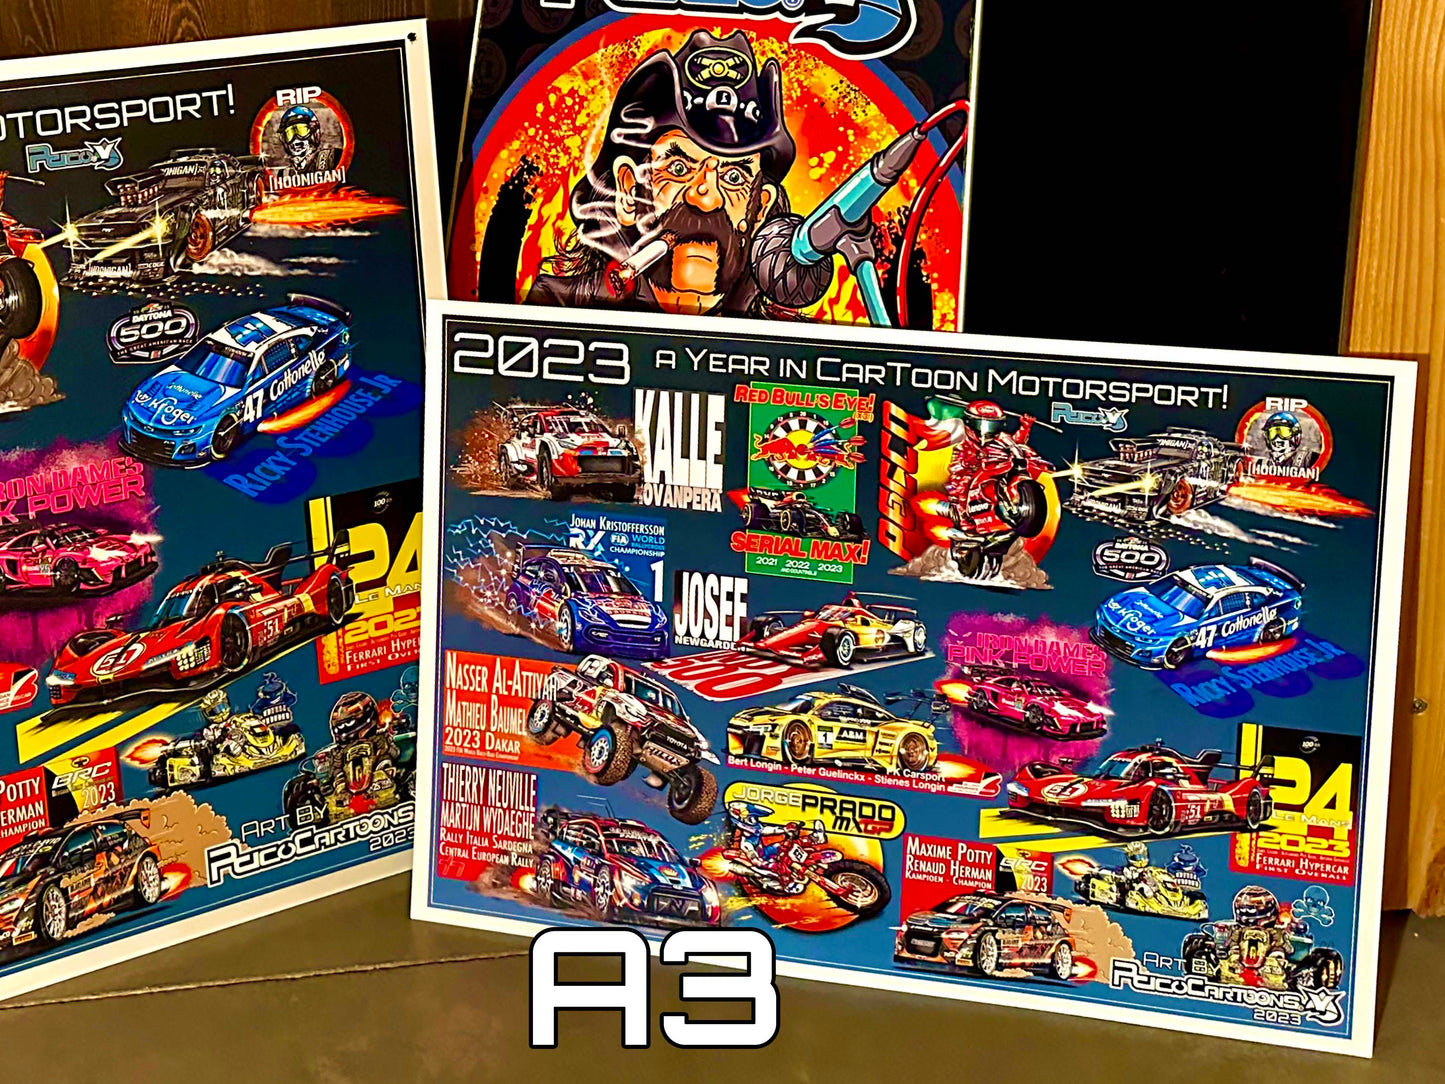 A year in Cartoon Motorsport A3 Poster 2023